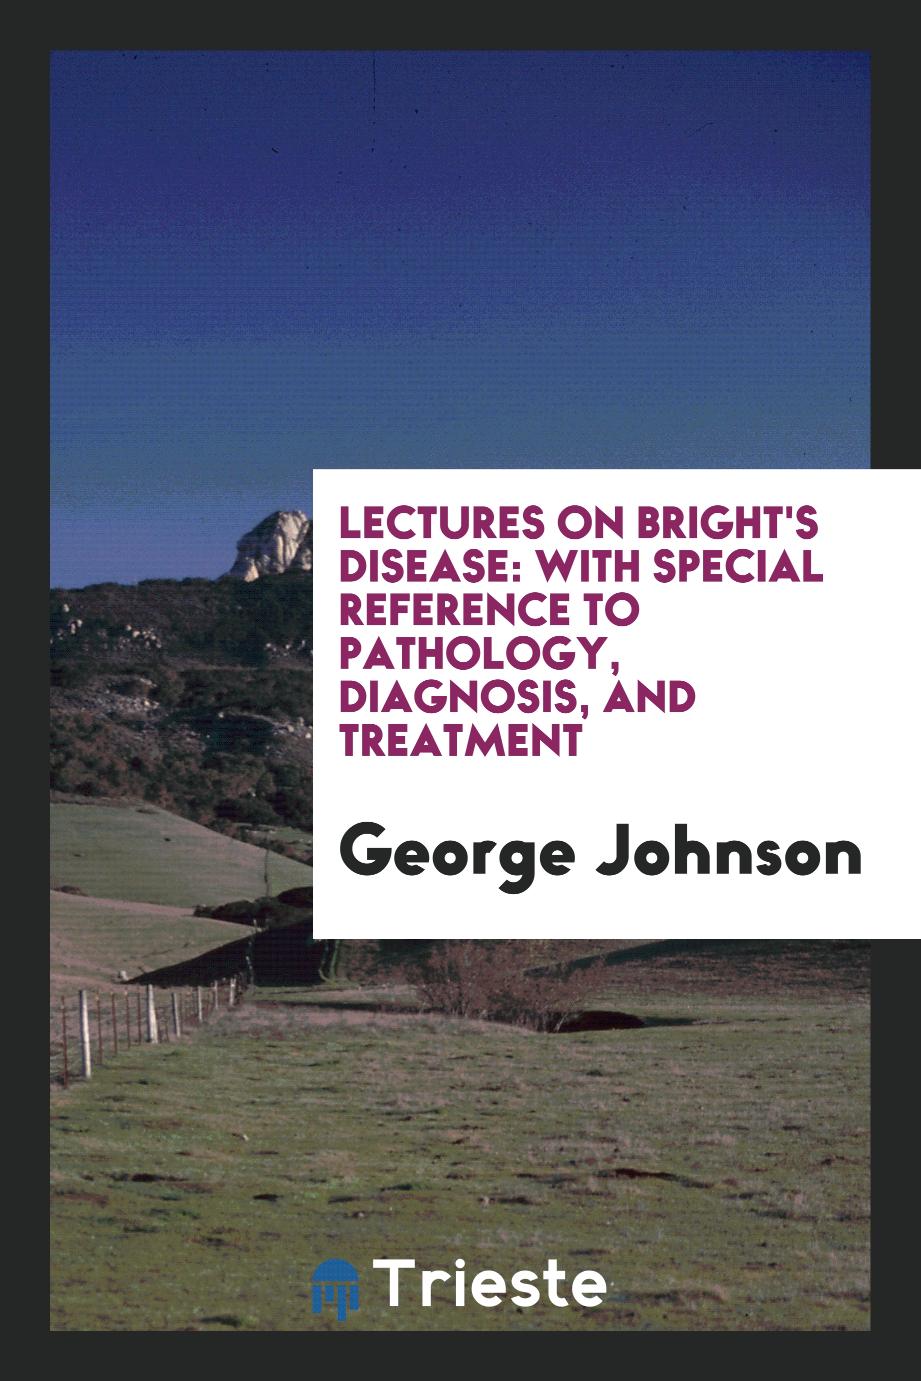 Lectures on Bright's Disease: With Special Reference to Pathology, Diagnosis, and Treatment